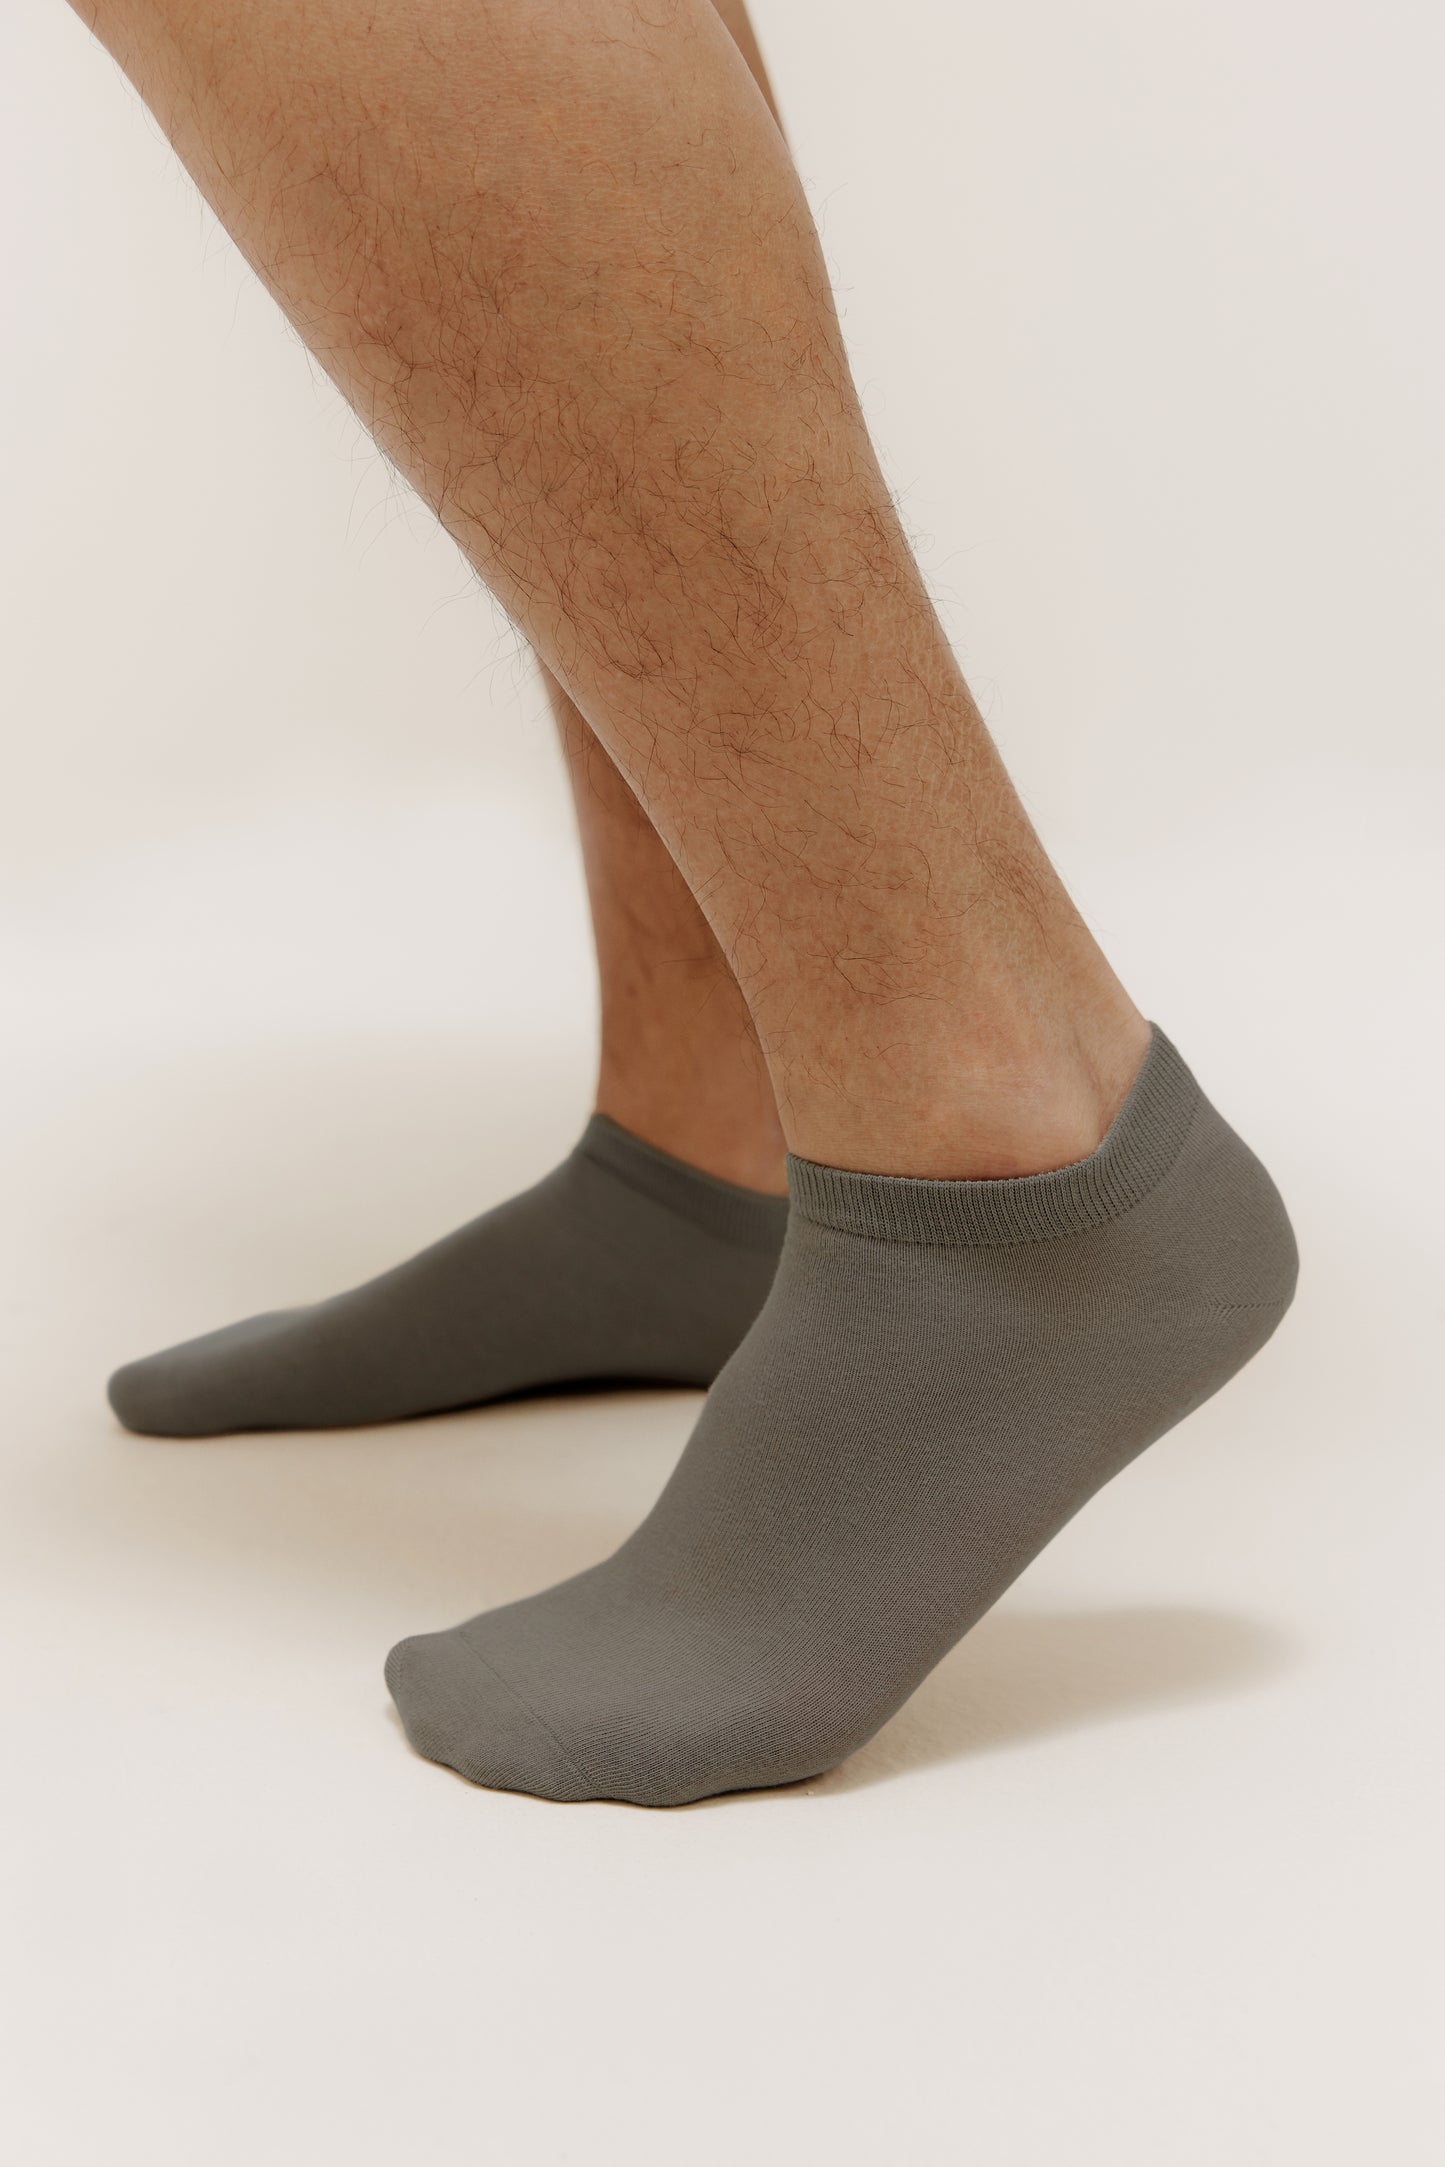 side view of a person wearing dark grey socks